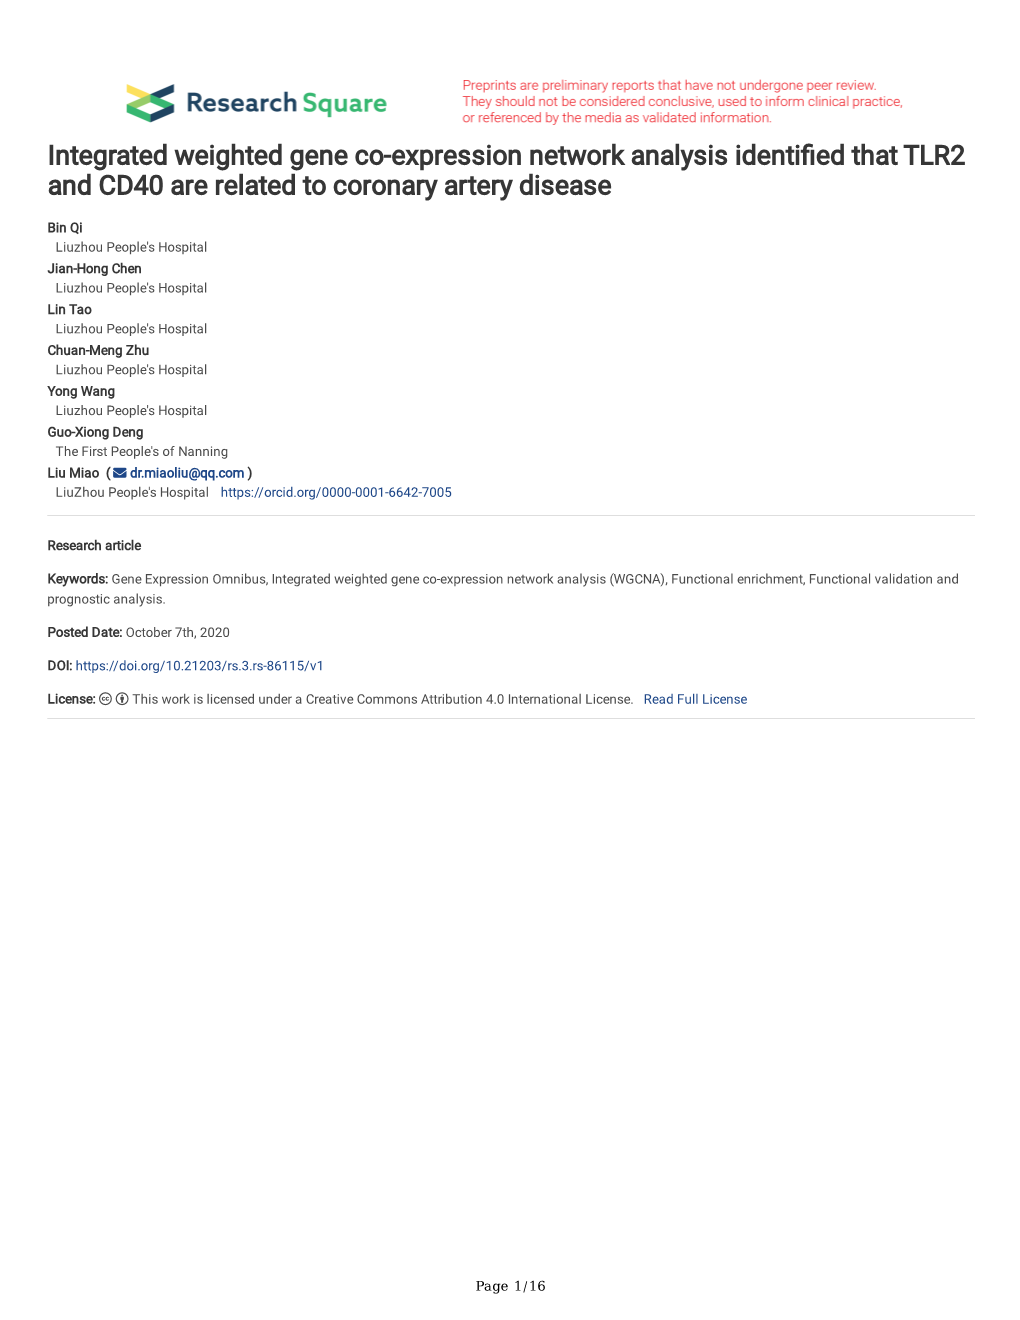 Integrated Weighted Gene Co-Expression Network Analysis Identi Ed That TLR2 and CD40 Are Related to Coronary Artery Disease